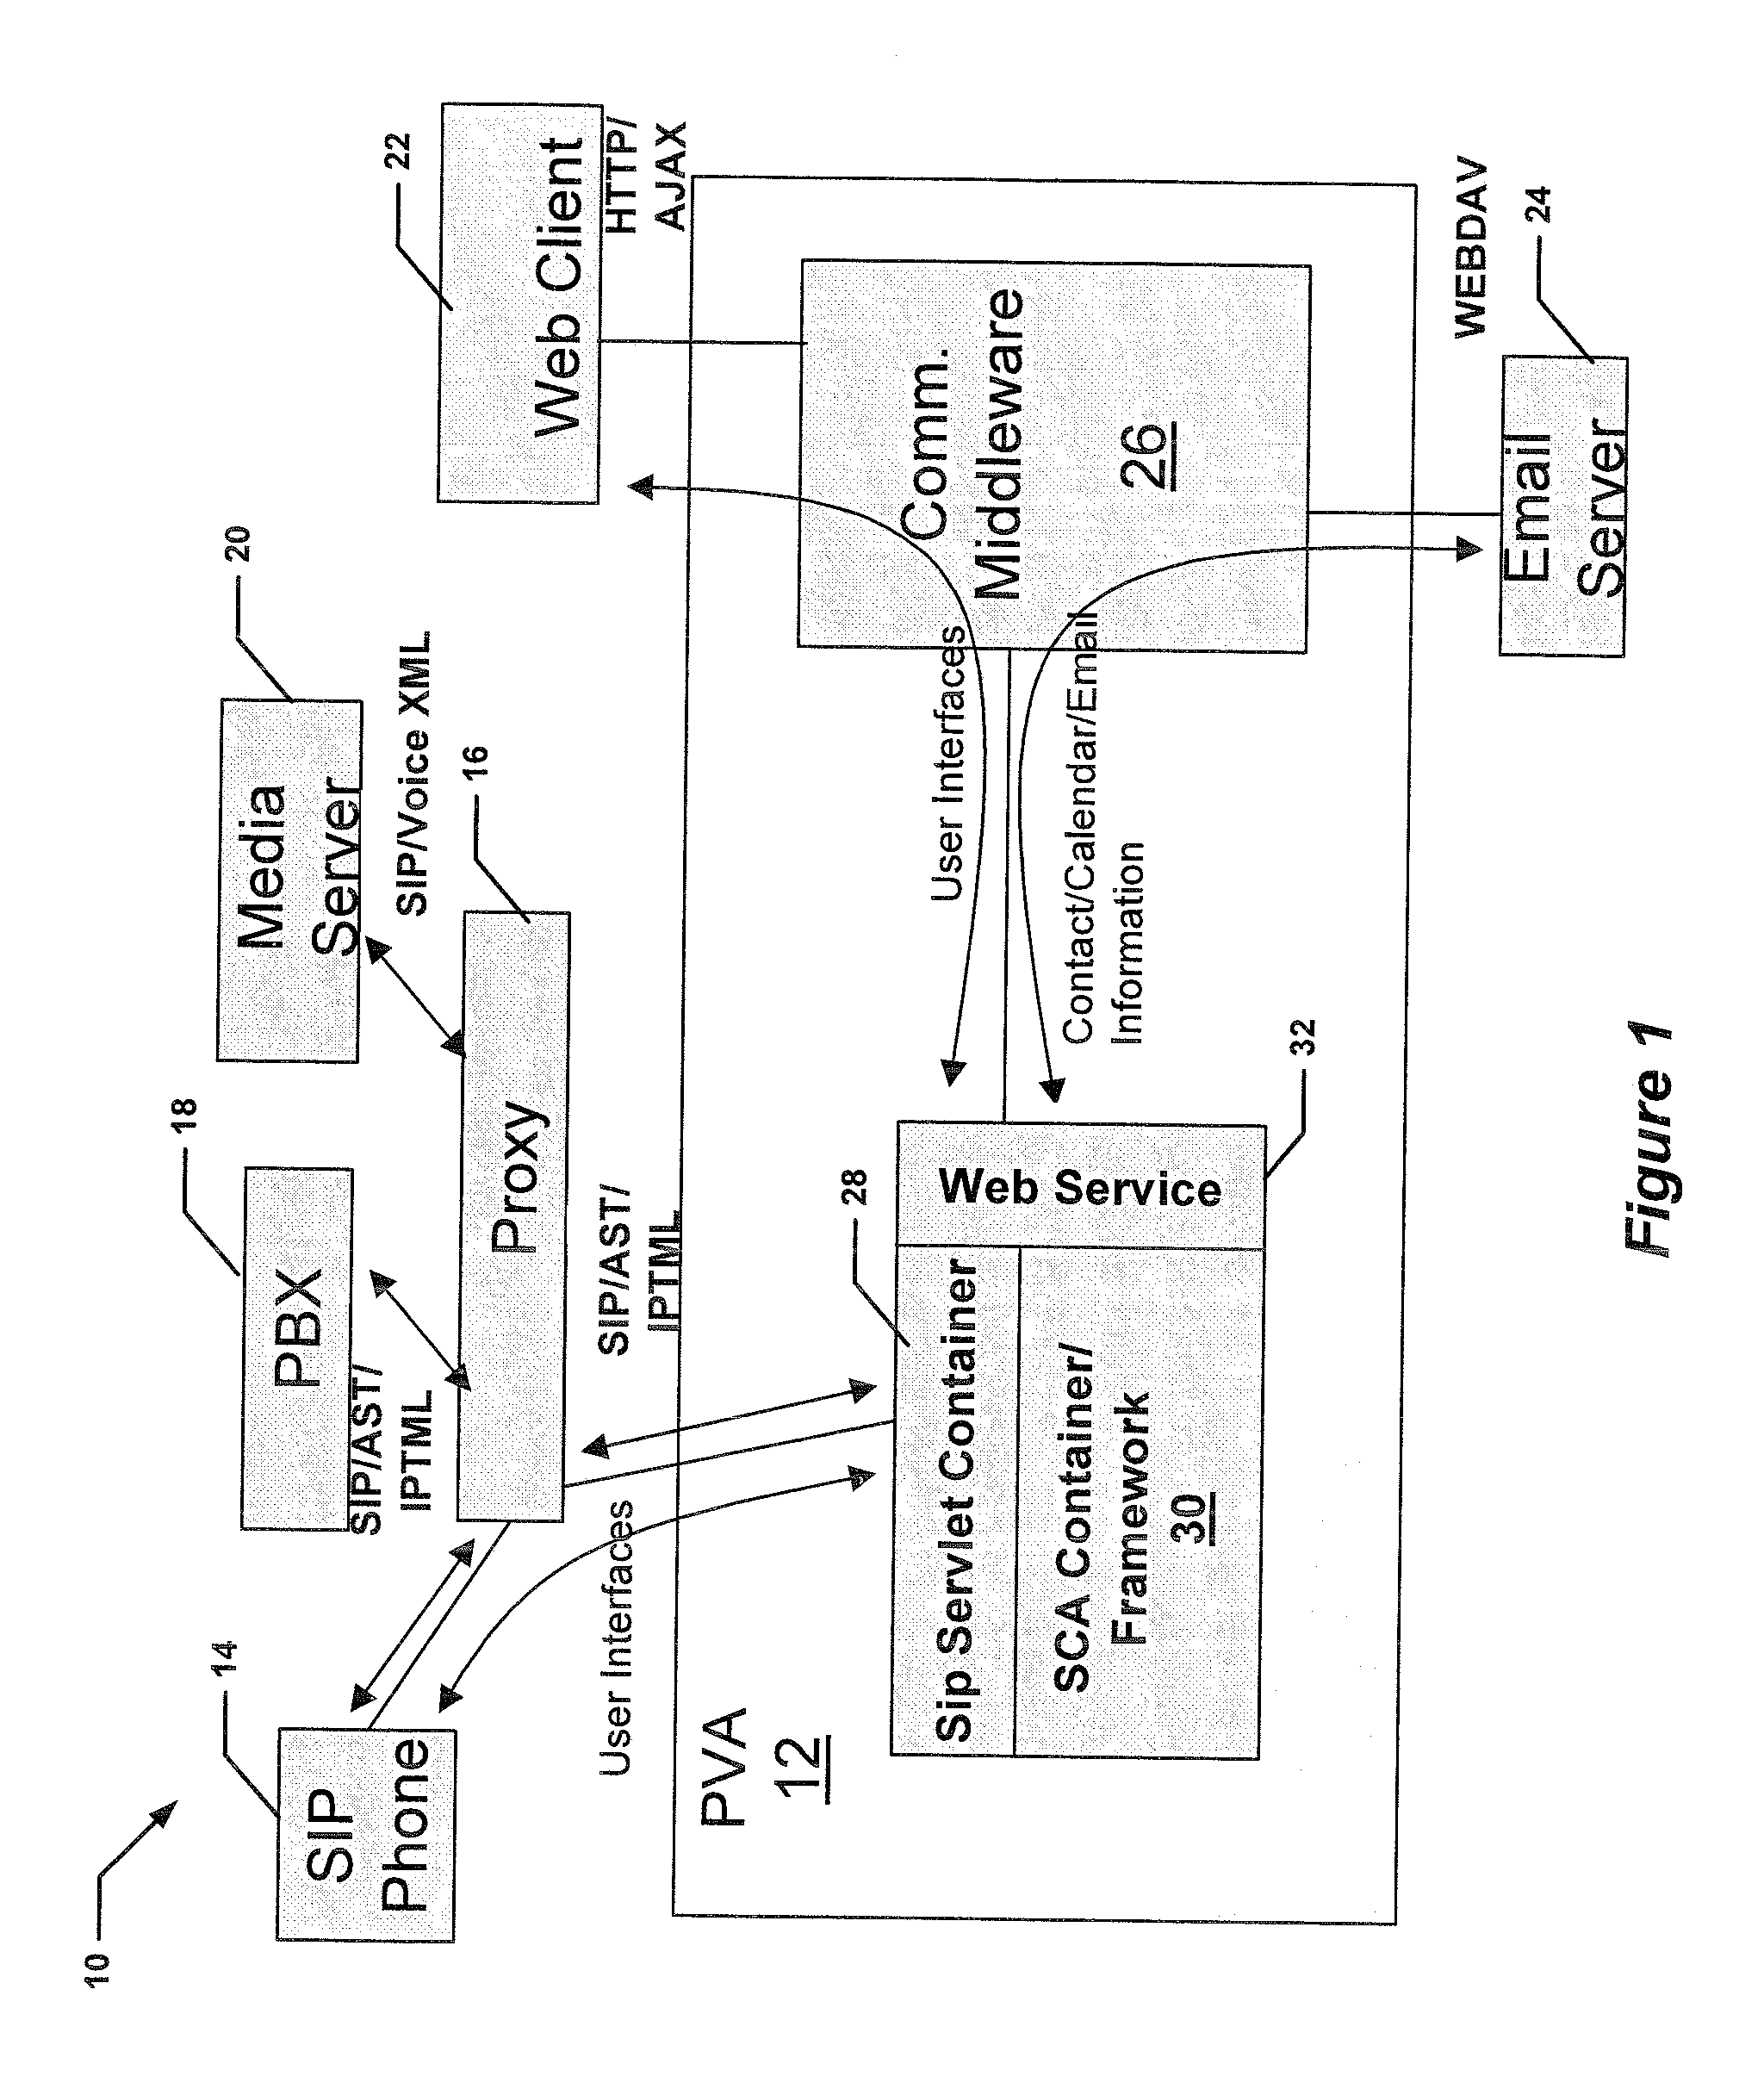 Method and apparatus providing sender information by way of a personal virtual assistant (PVA)